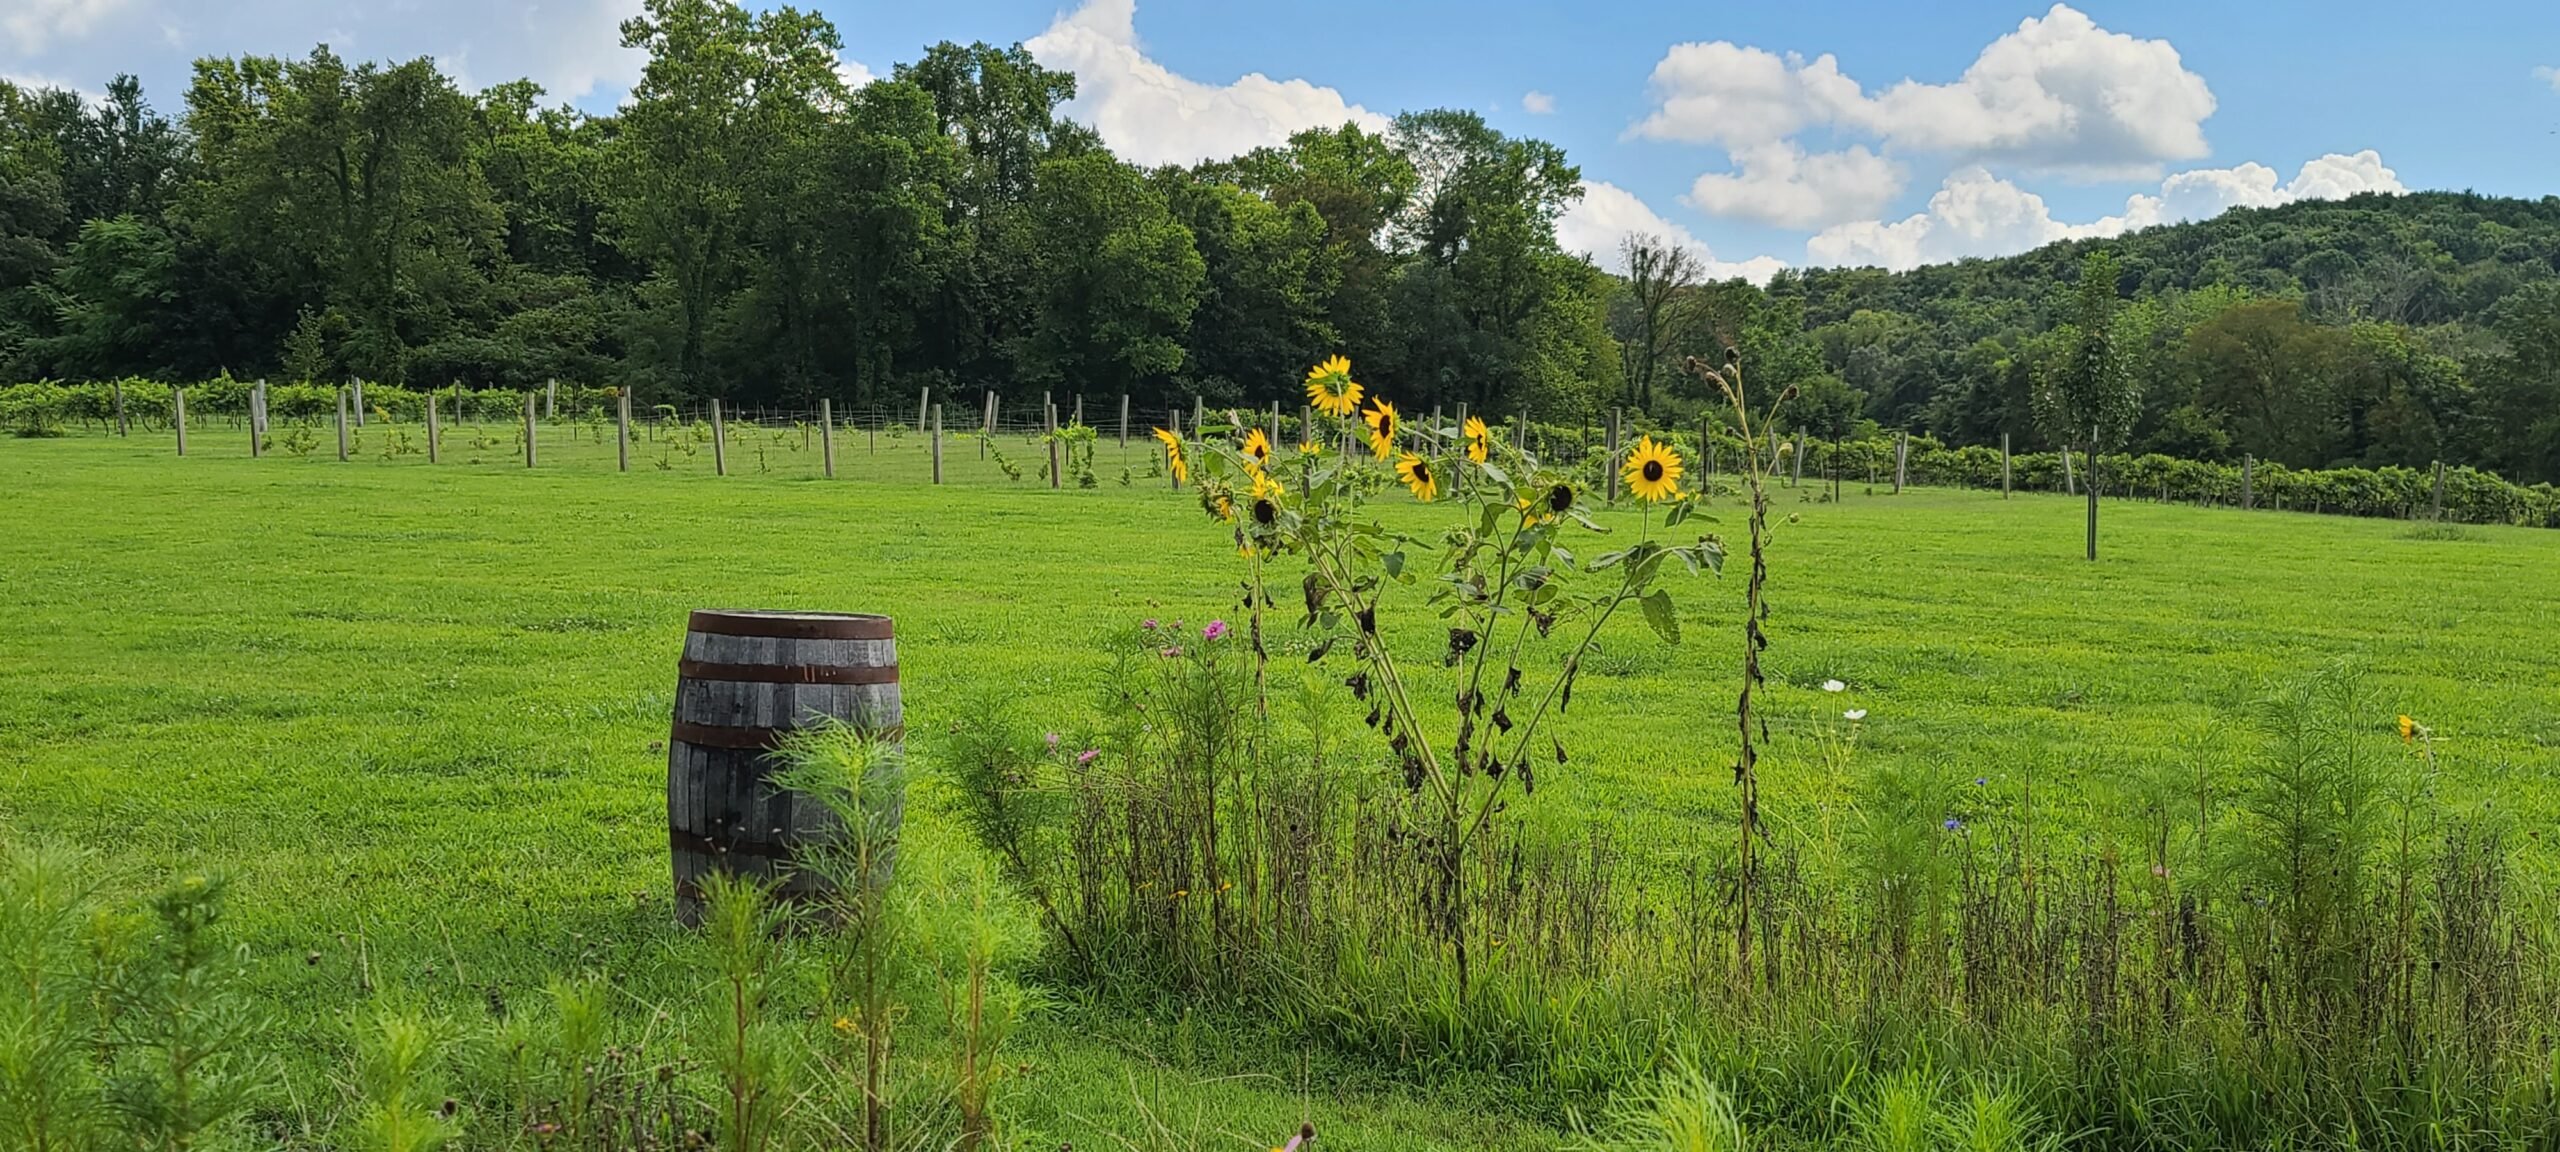 landscape with sunflowers - feature image for Places To Go RVing This Spring